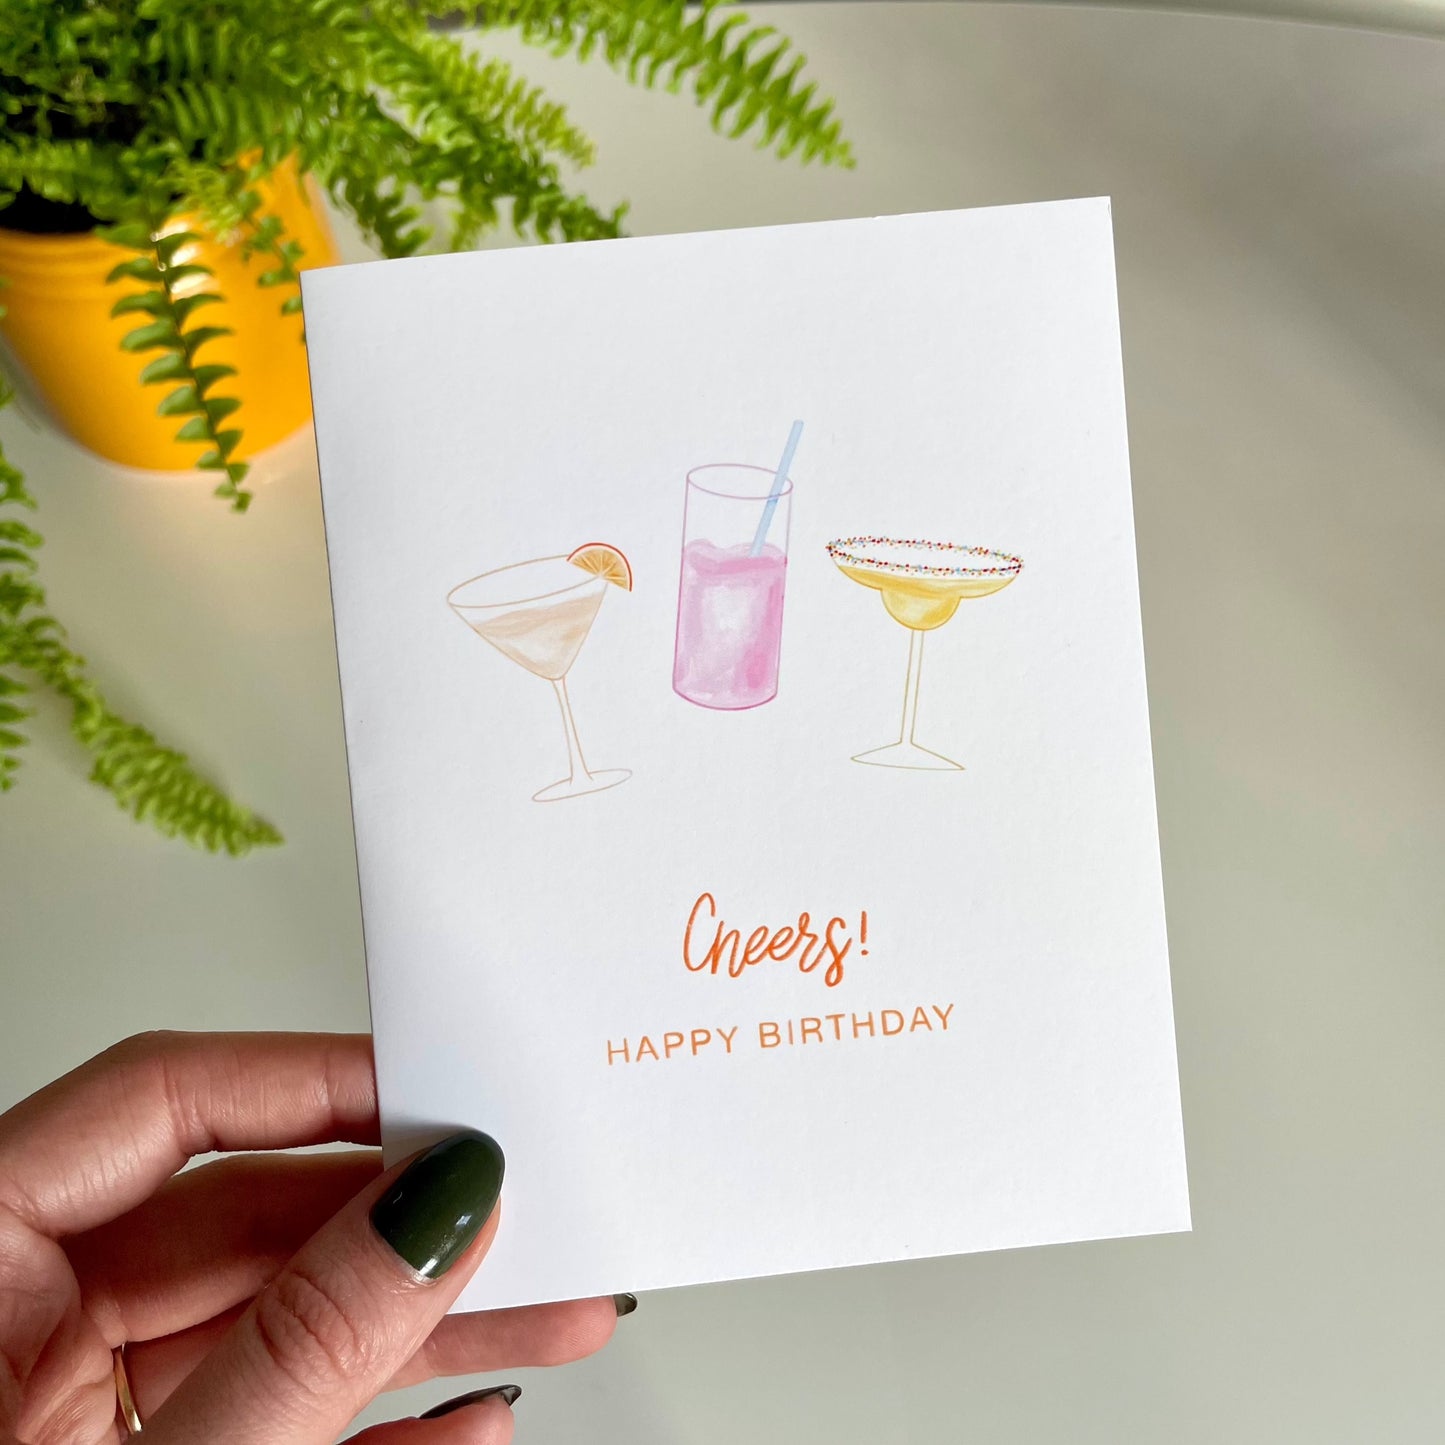 watercolor drawing of cocktails birthday card. Margarita, 